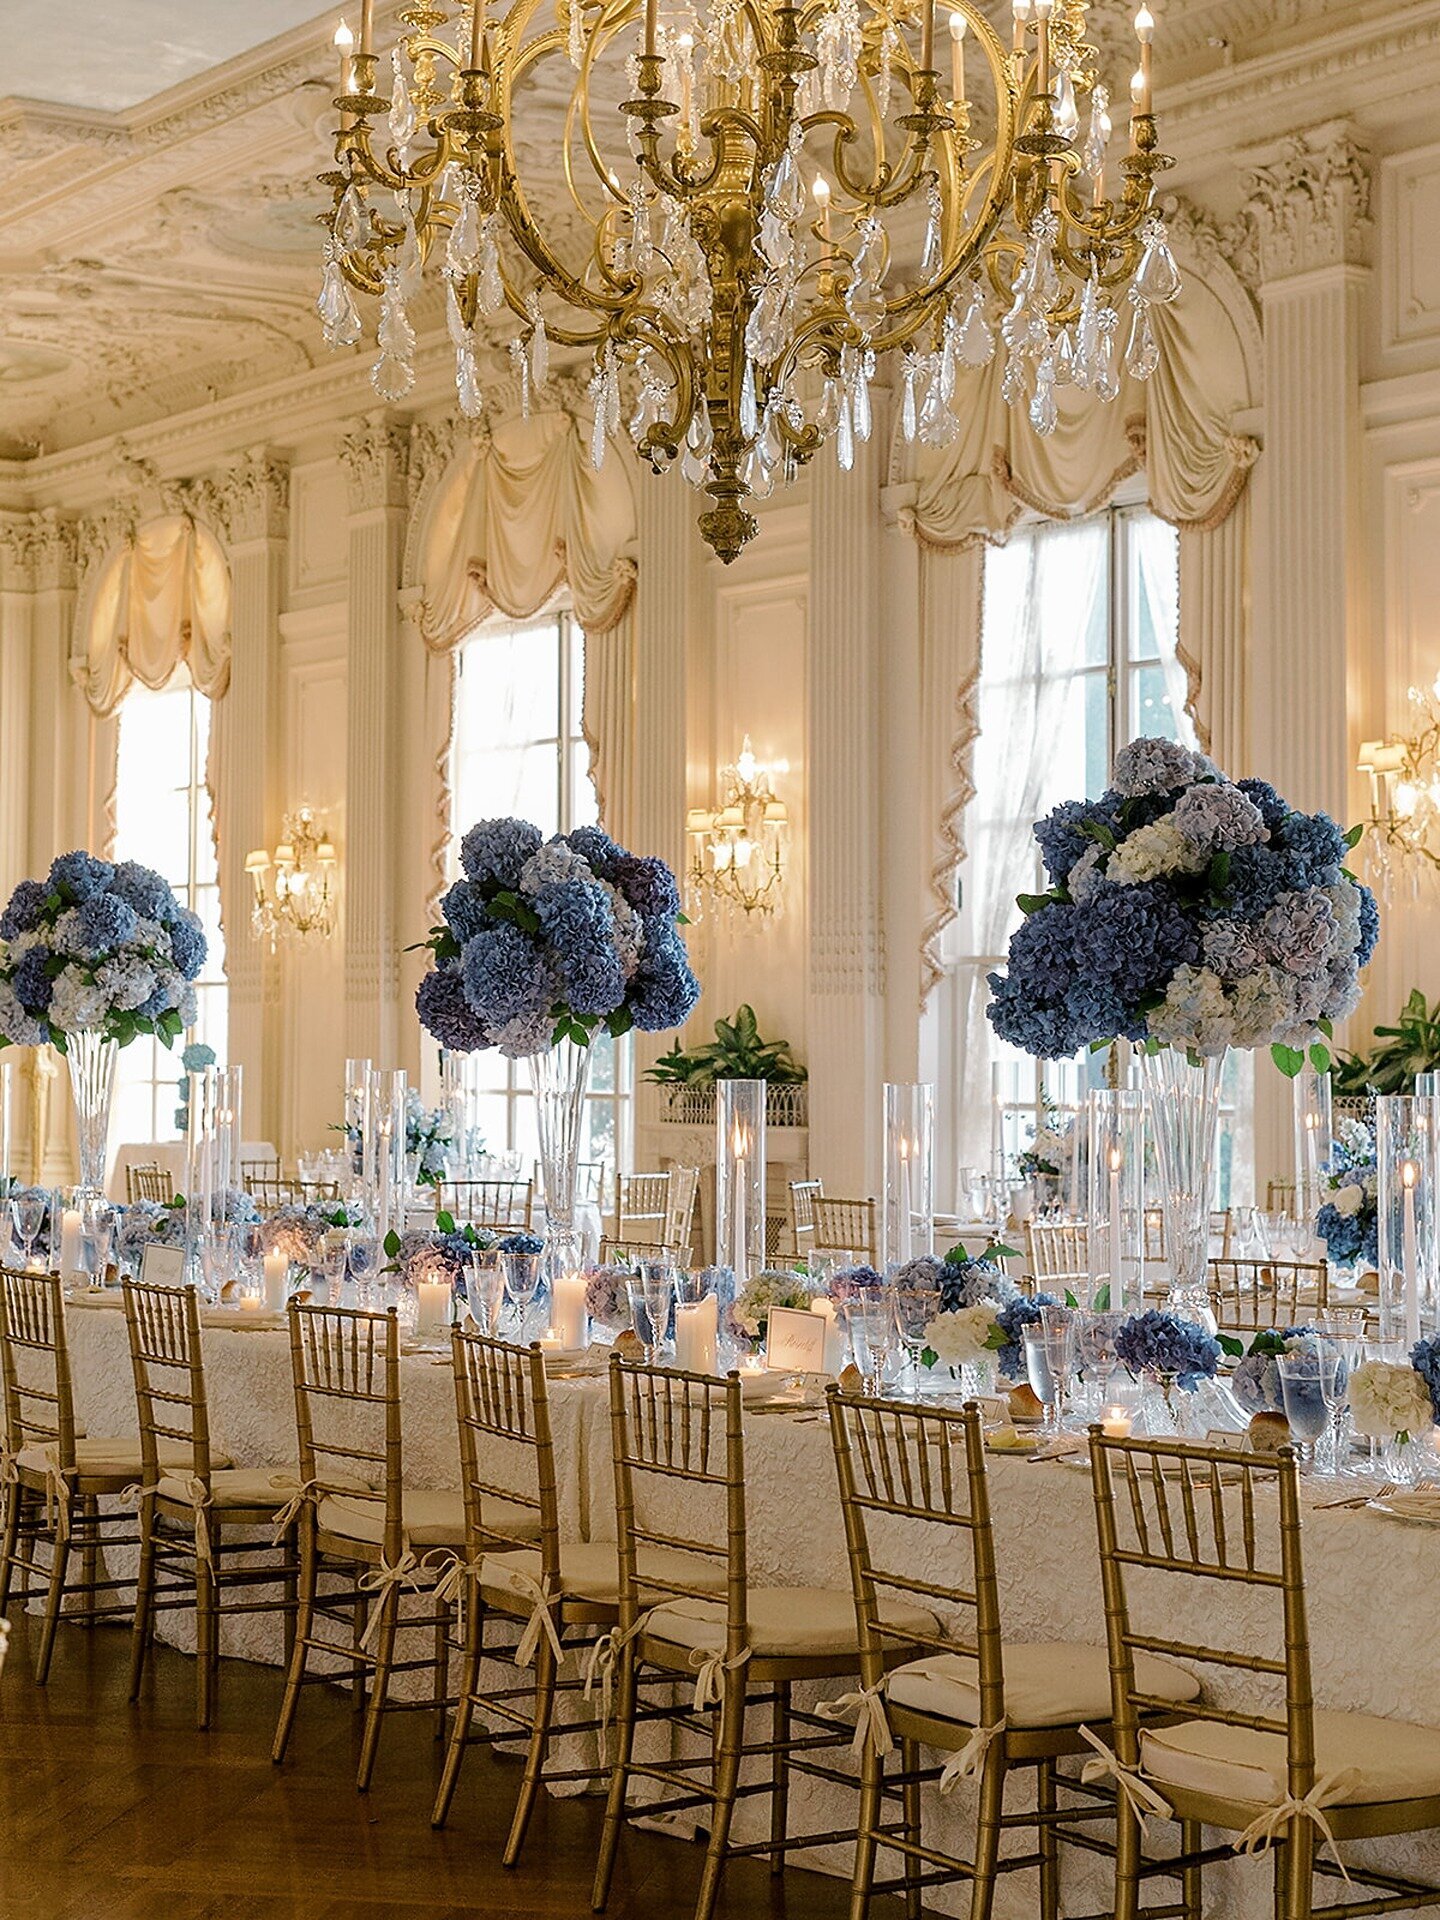 leila-james-events-newport-ri-wedding-planning-luxury-events-evie-and-mike-classic-elegance-rosecliff-mansion-stephanie-vegliante-photography-68